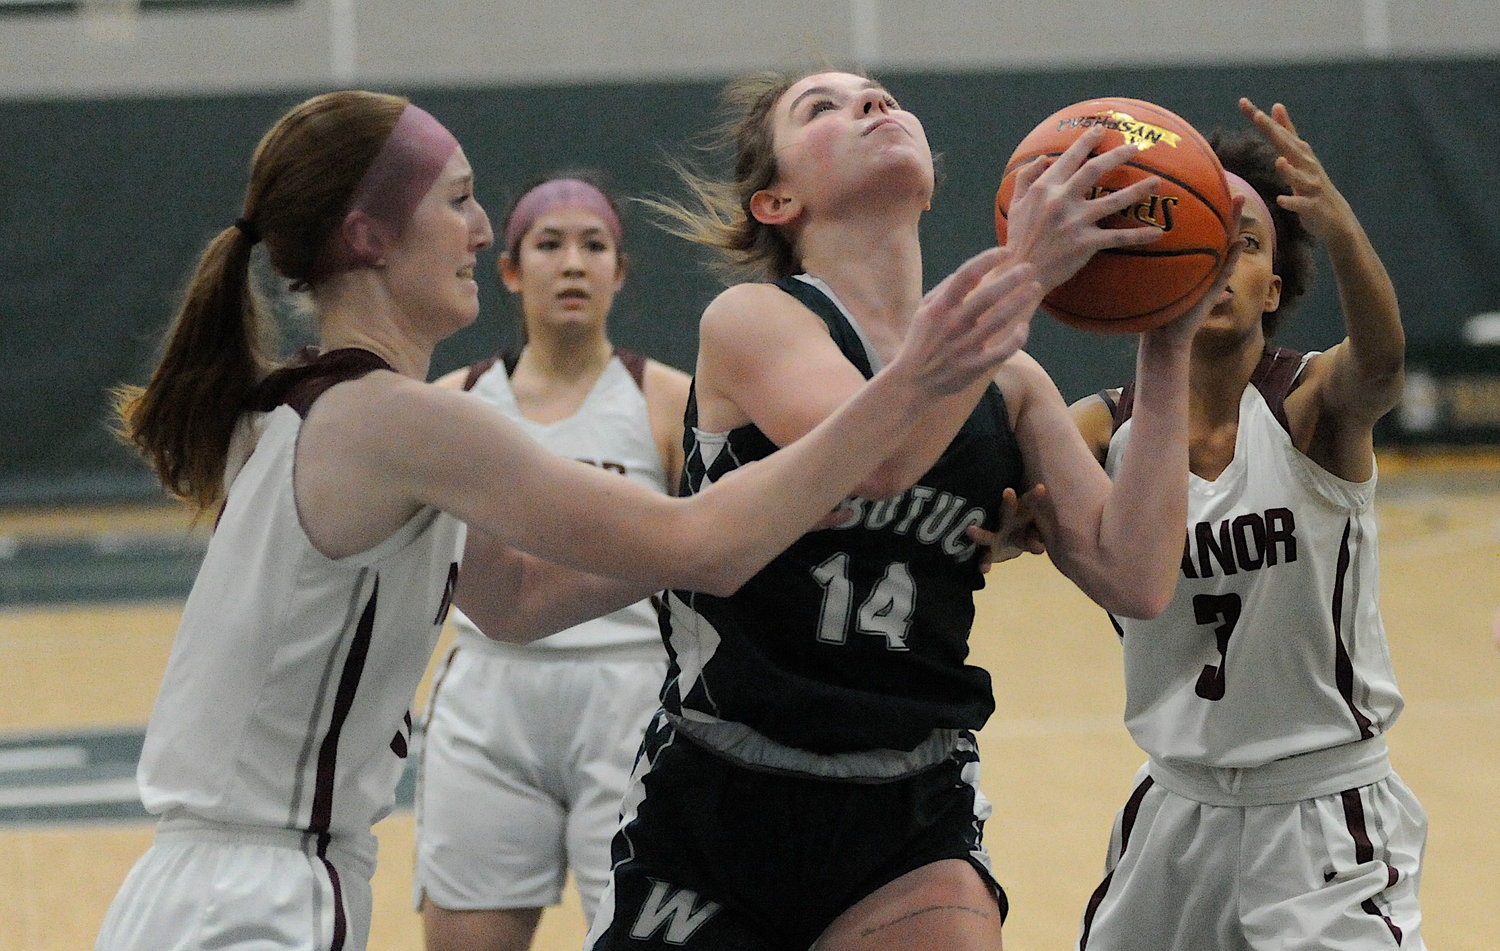 Cutting through the crowd. Not to be denied, Webutuck’s Olivia Farnham is on the way to scoring 15 points, despite the best defensive efforts of Manor’s Hailey Wolcott, Jocelyn Mills and Nevaeha Jones.